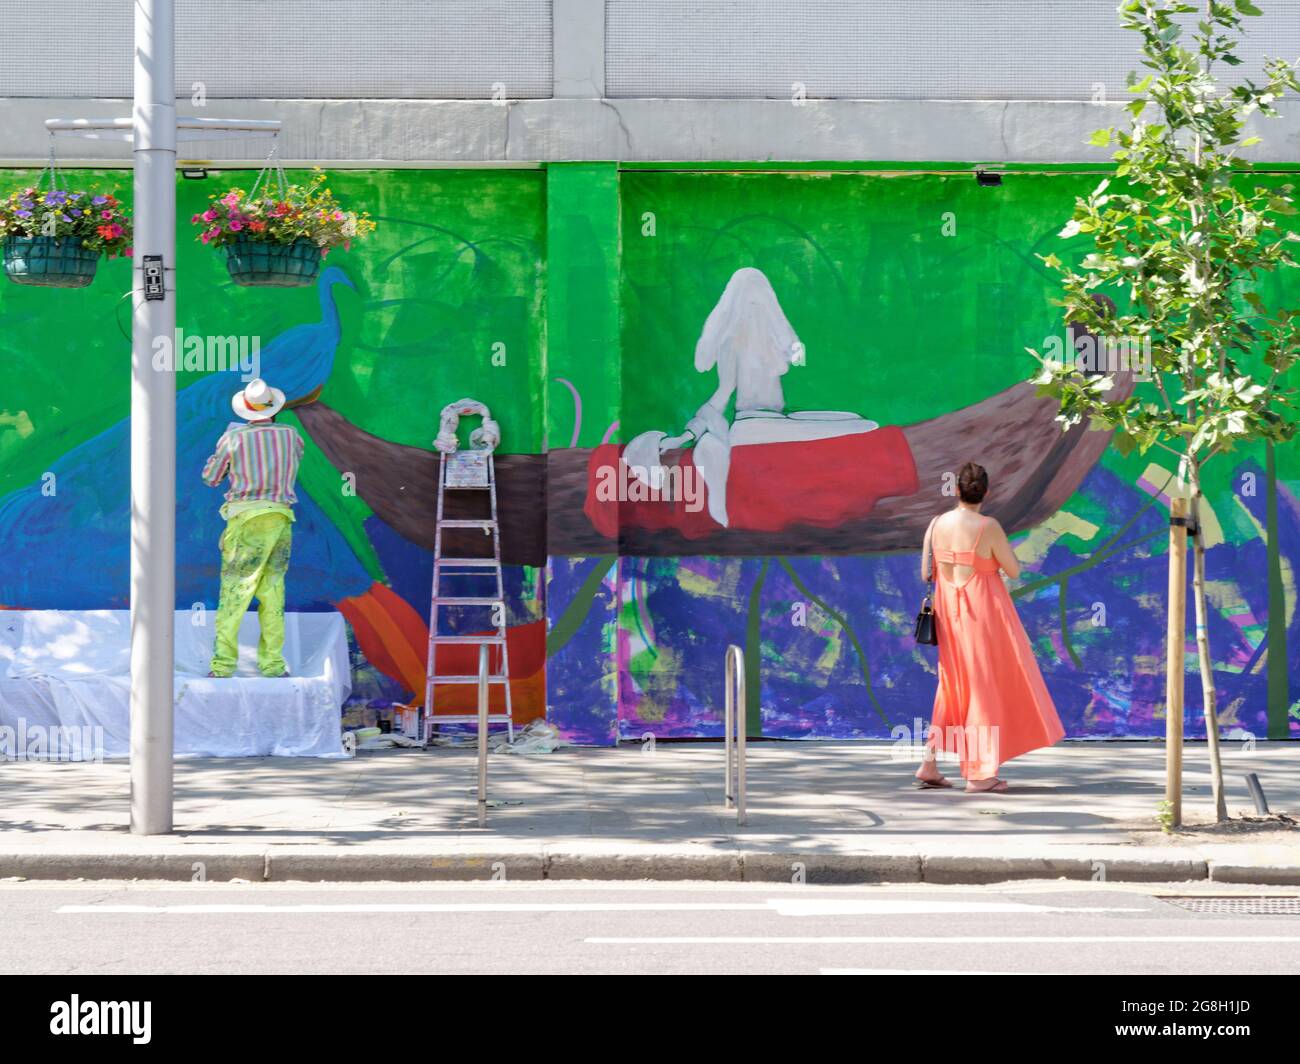 London, Greater London, England, June 12 2021: Man beside step ladder wearing paints a wall on the Kings Road as a lady observes, Chelsea. Stock Photo